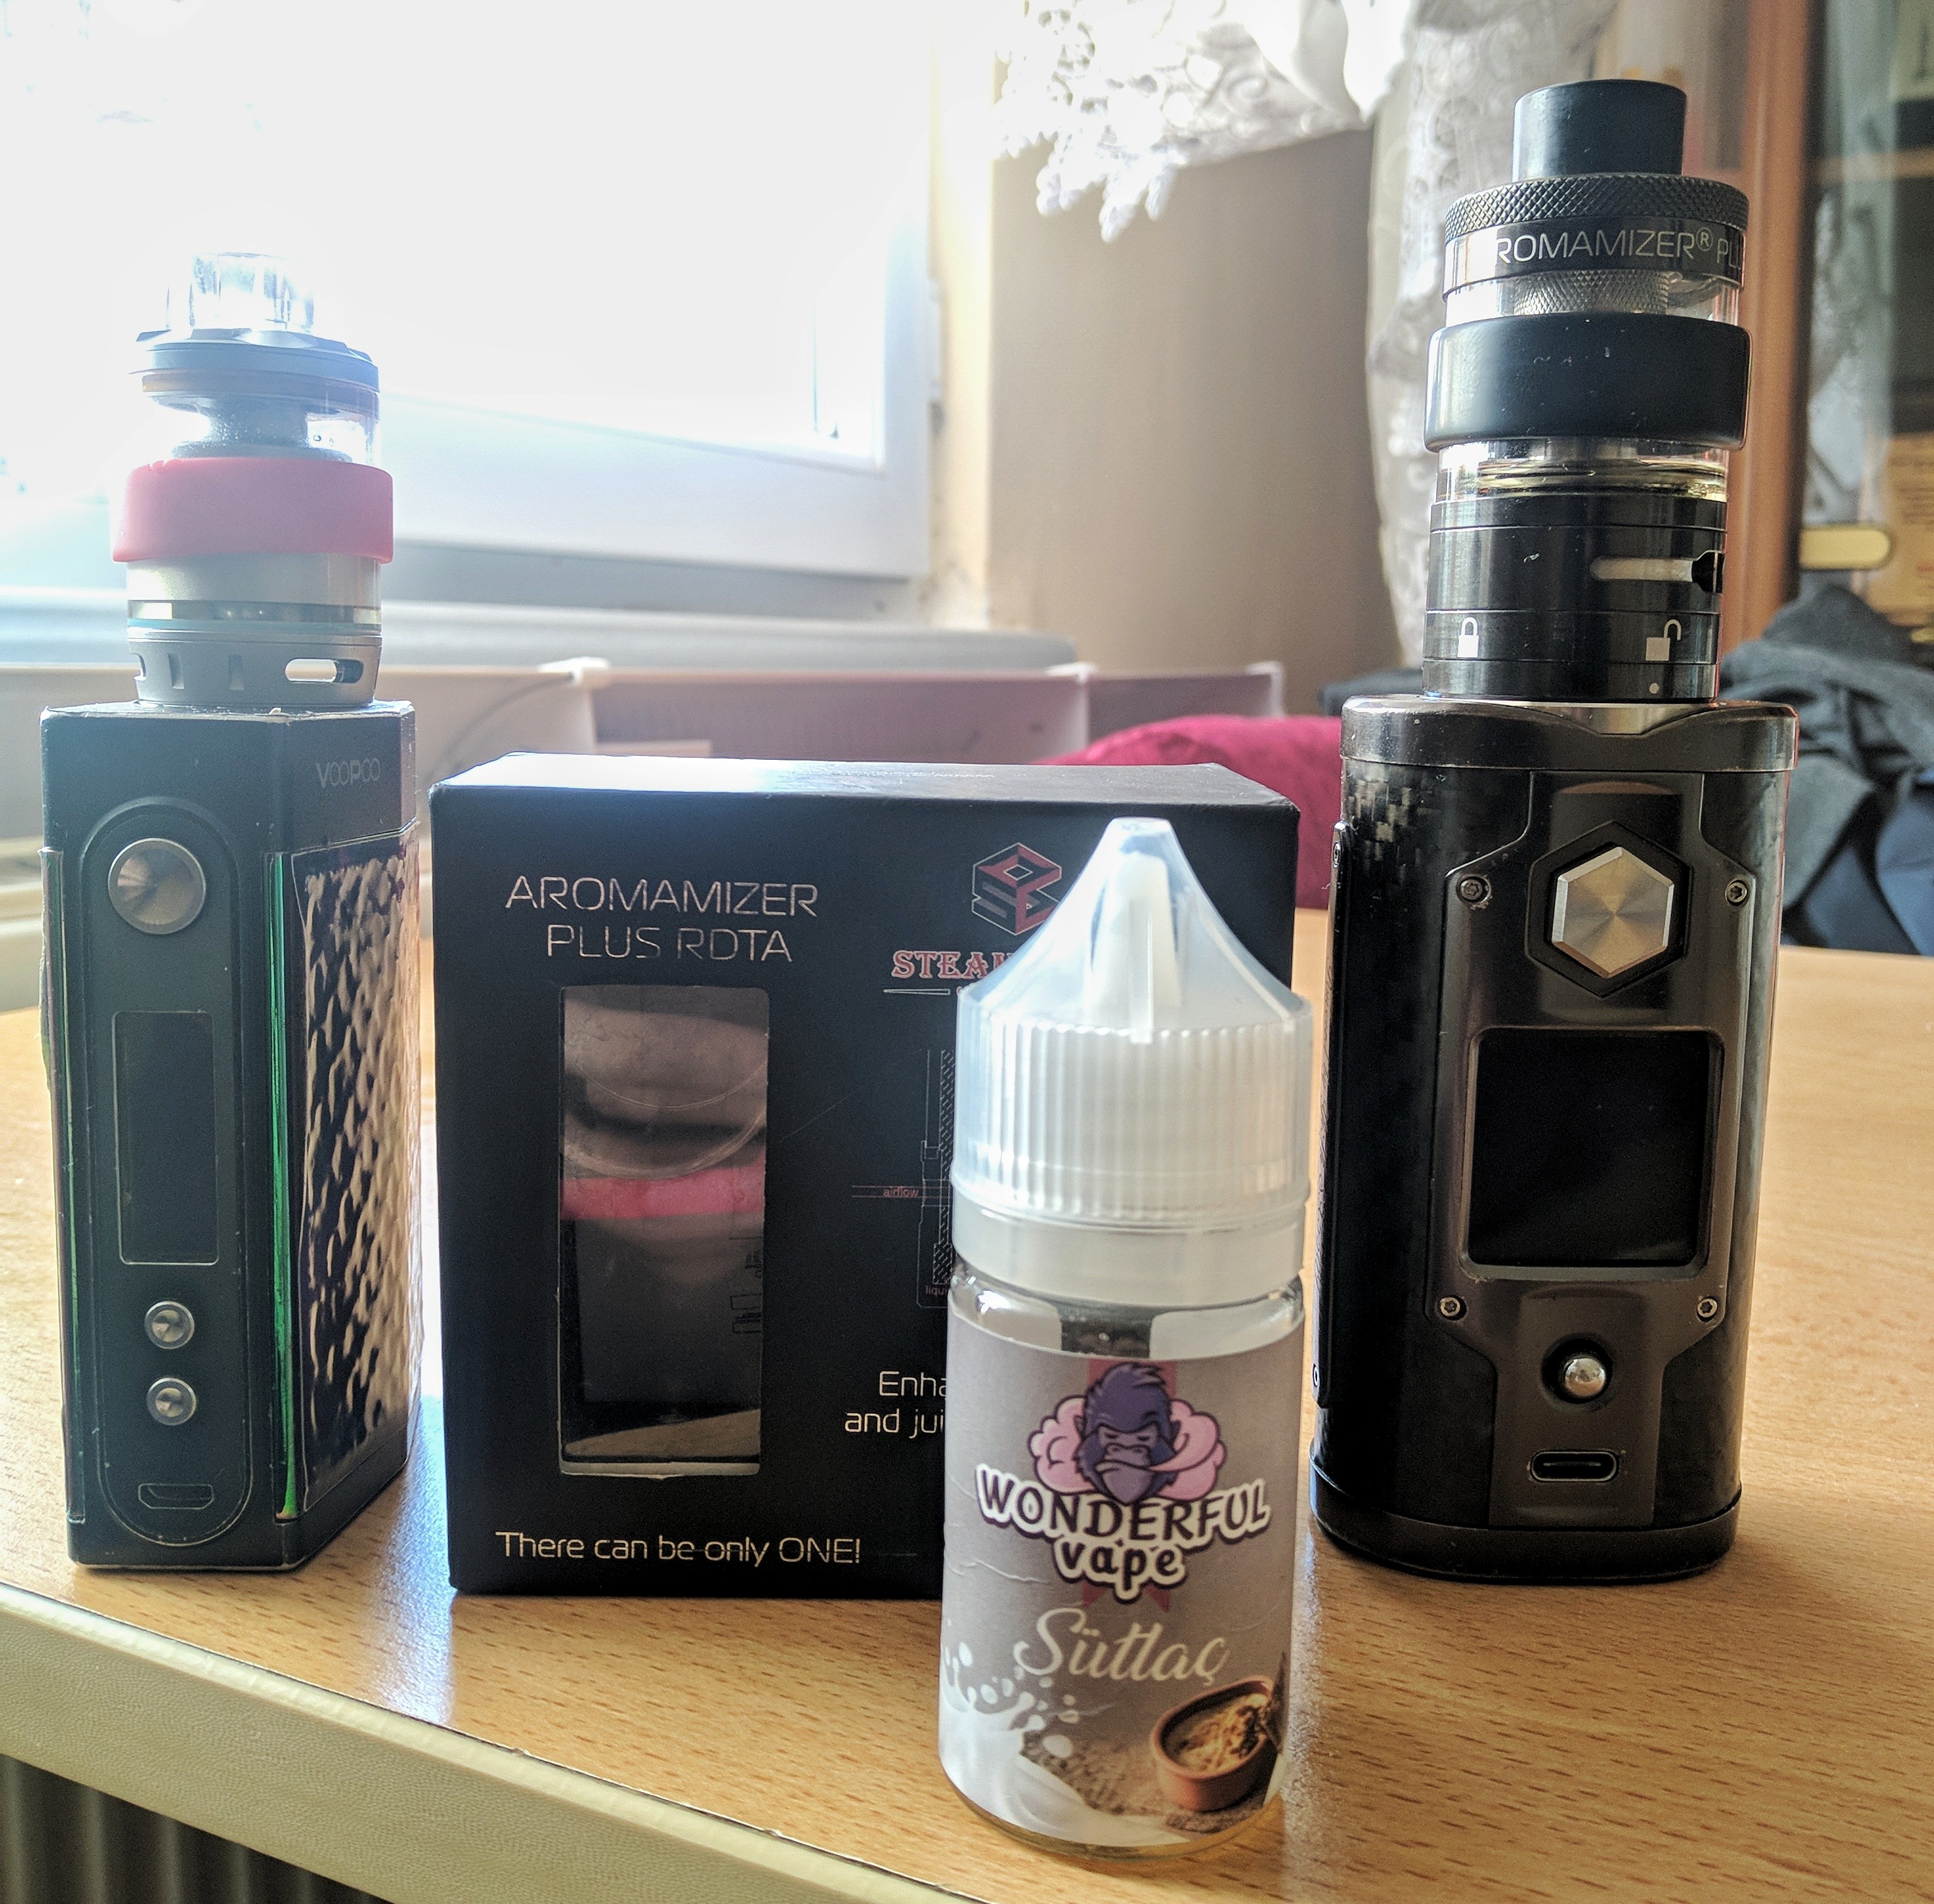 Aromamizer plus rdta by steam crave фото 57